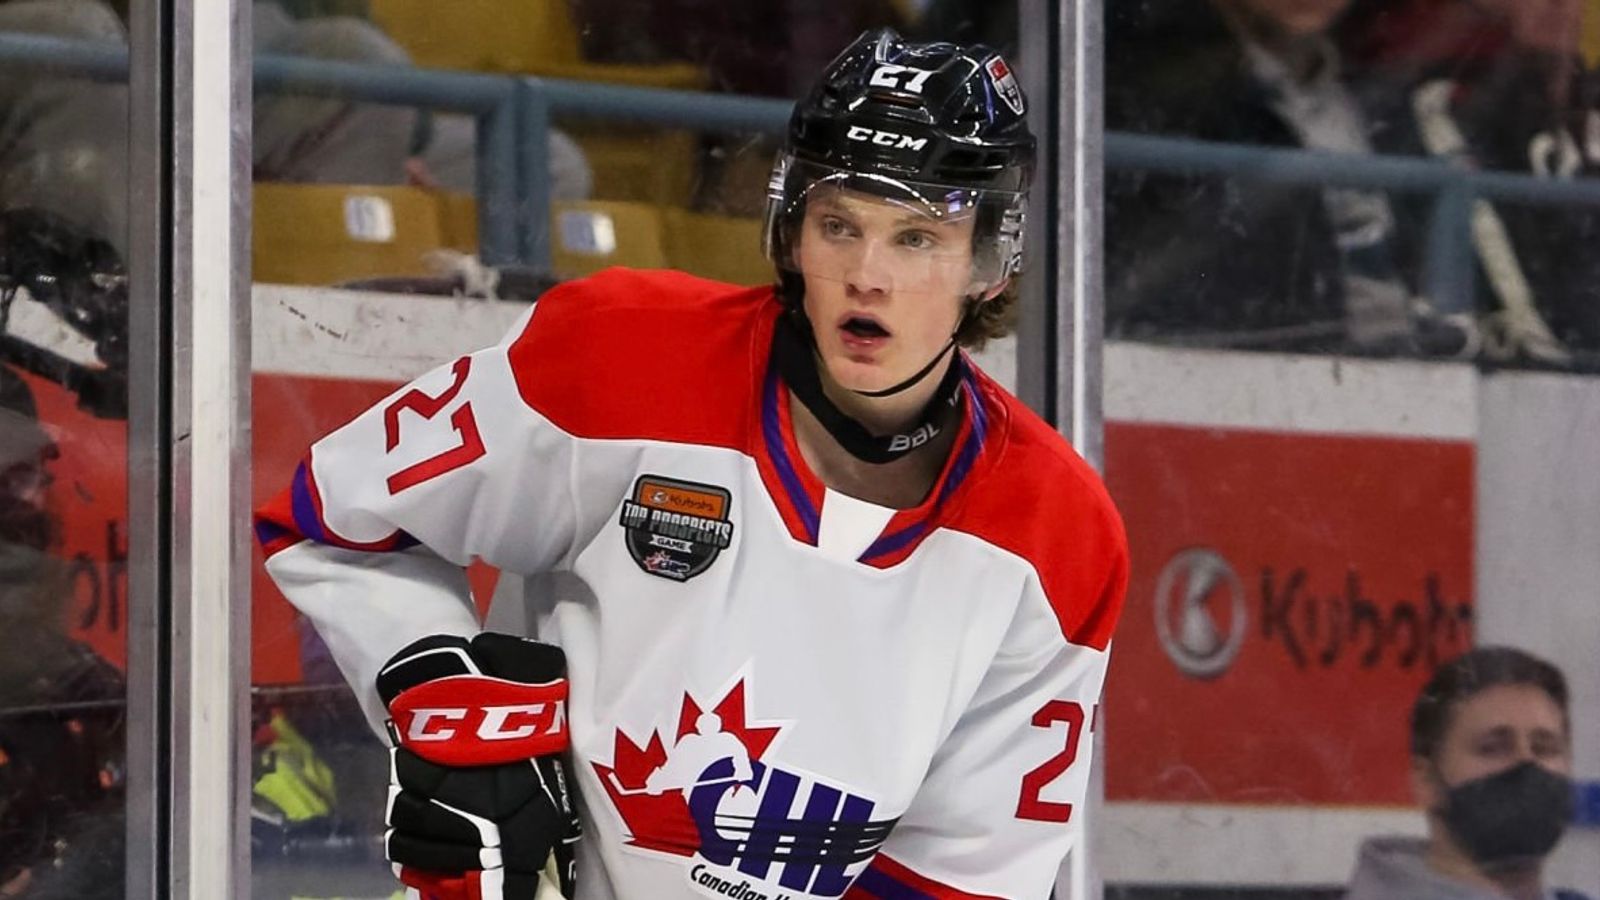 Roster announced for Canada's National Junior Team selection camp